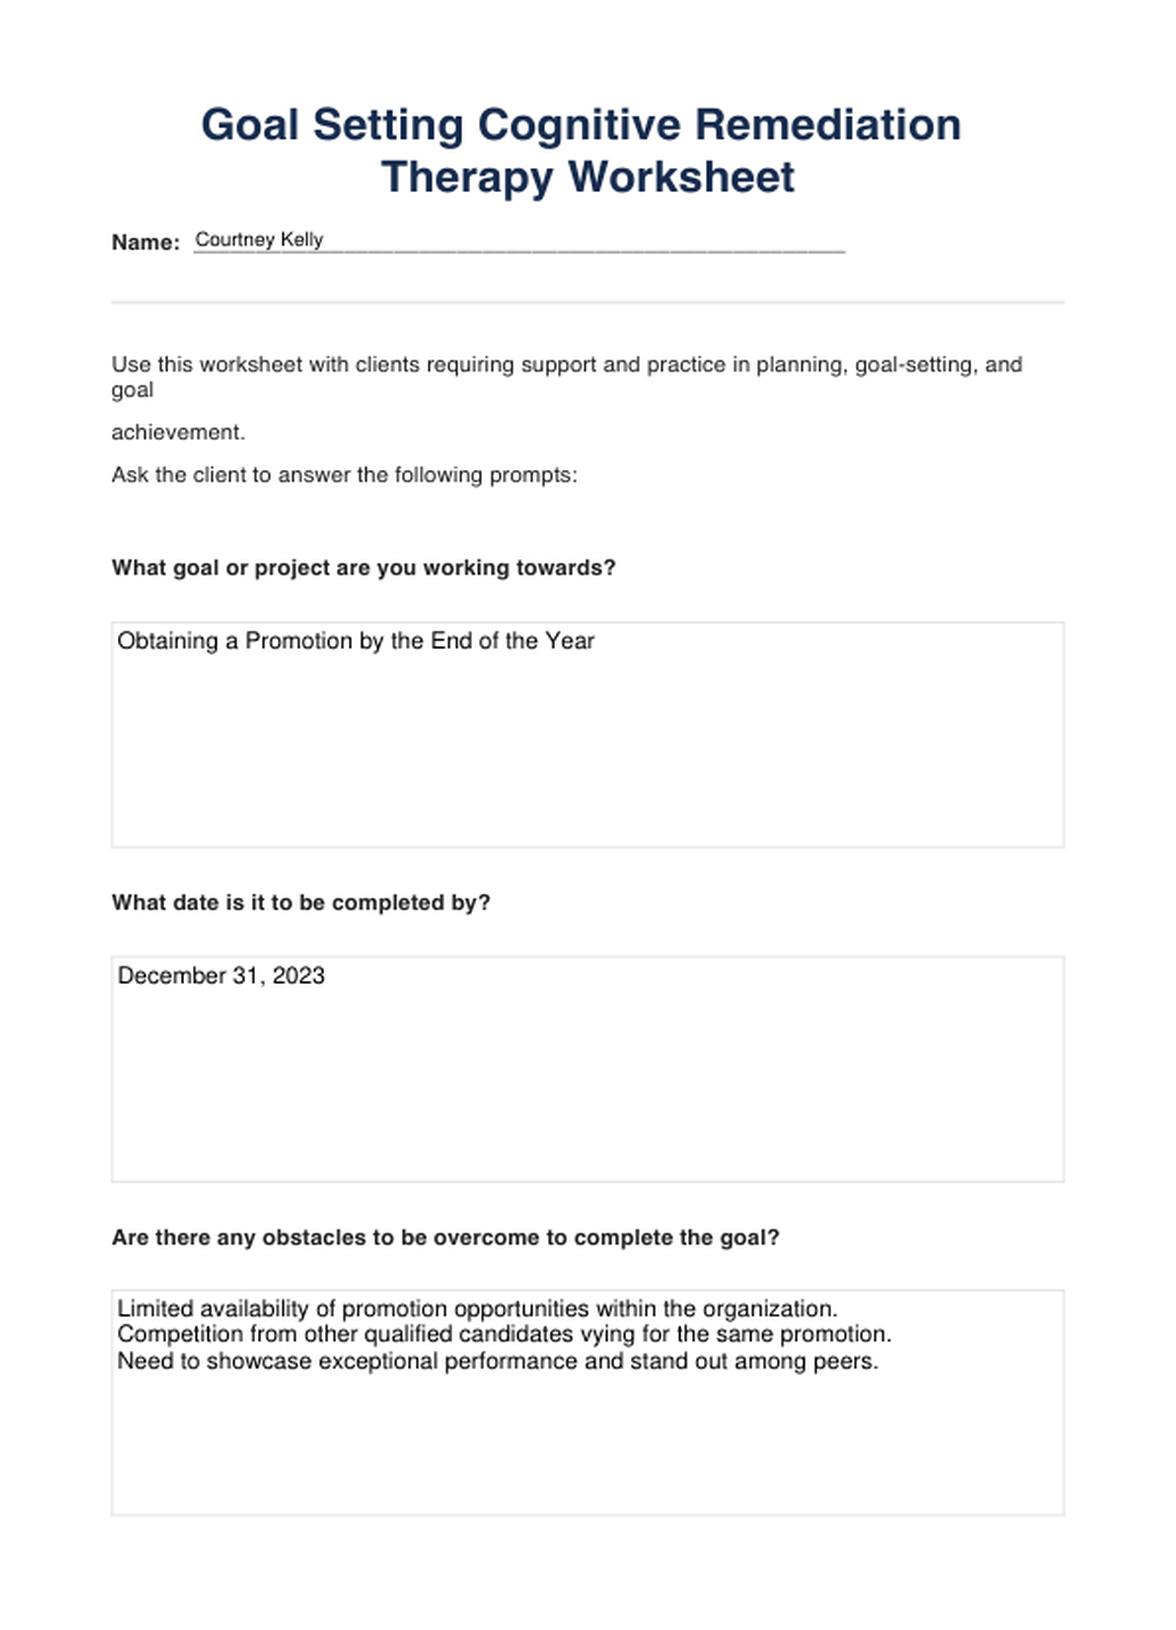 Goal Setting Cognitive Remediation Therapy Worksheet PDF Example